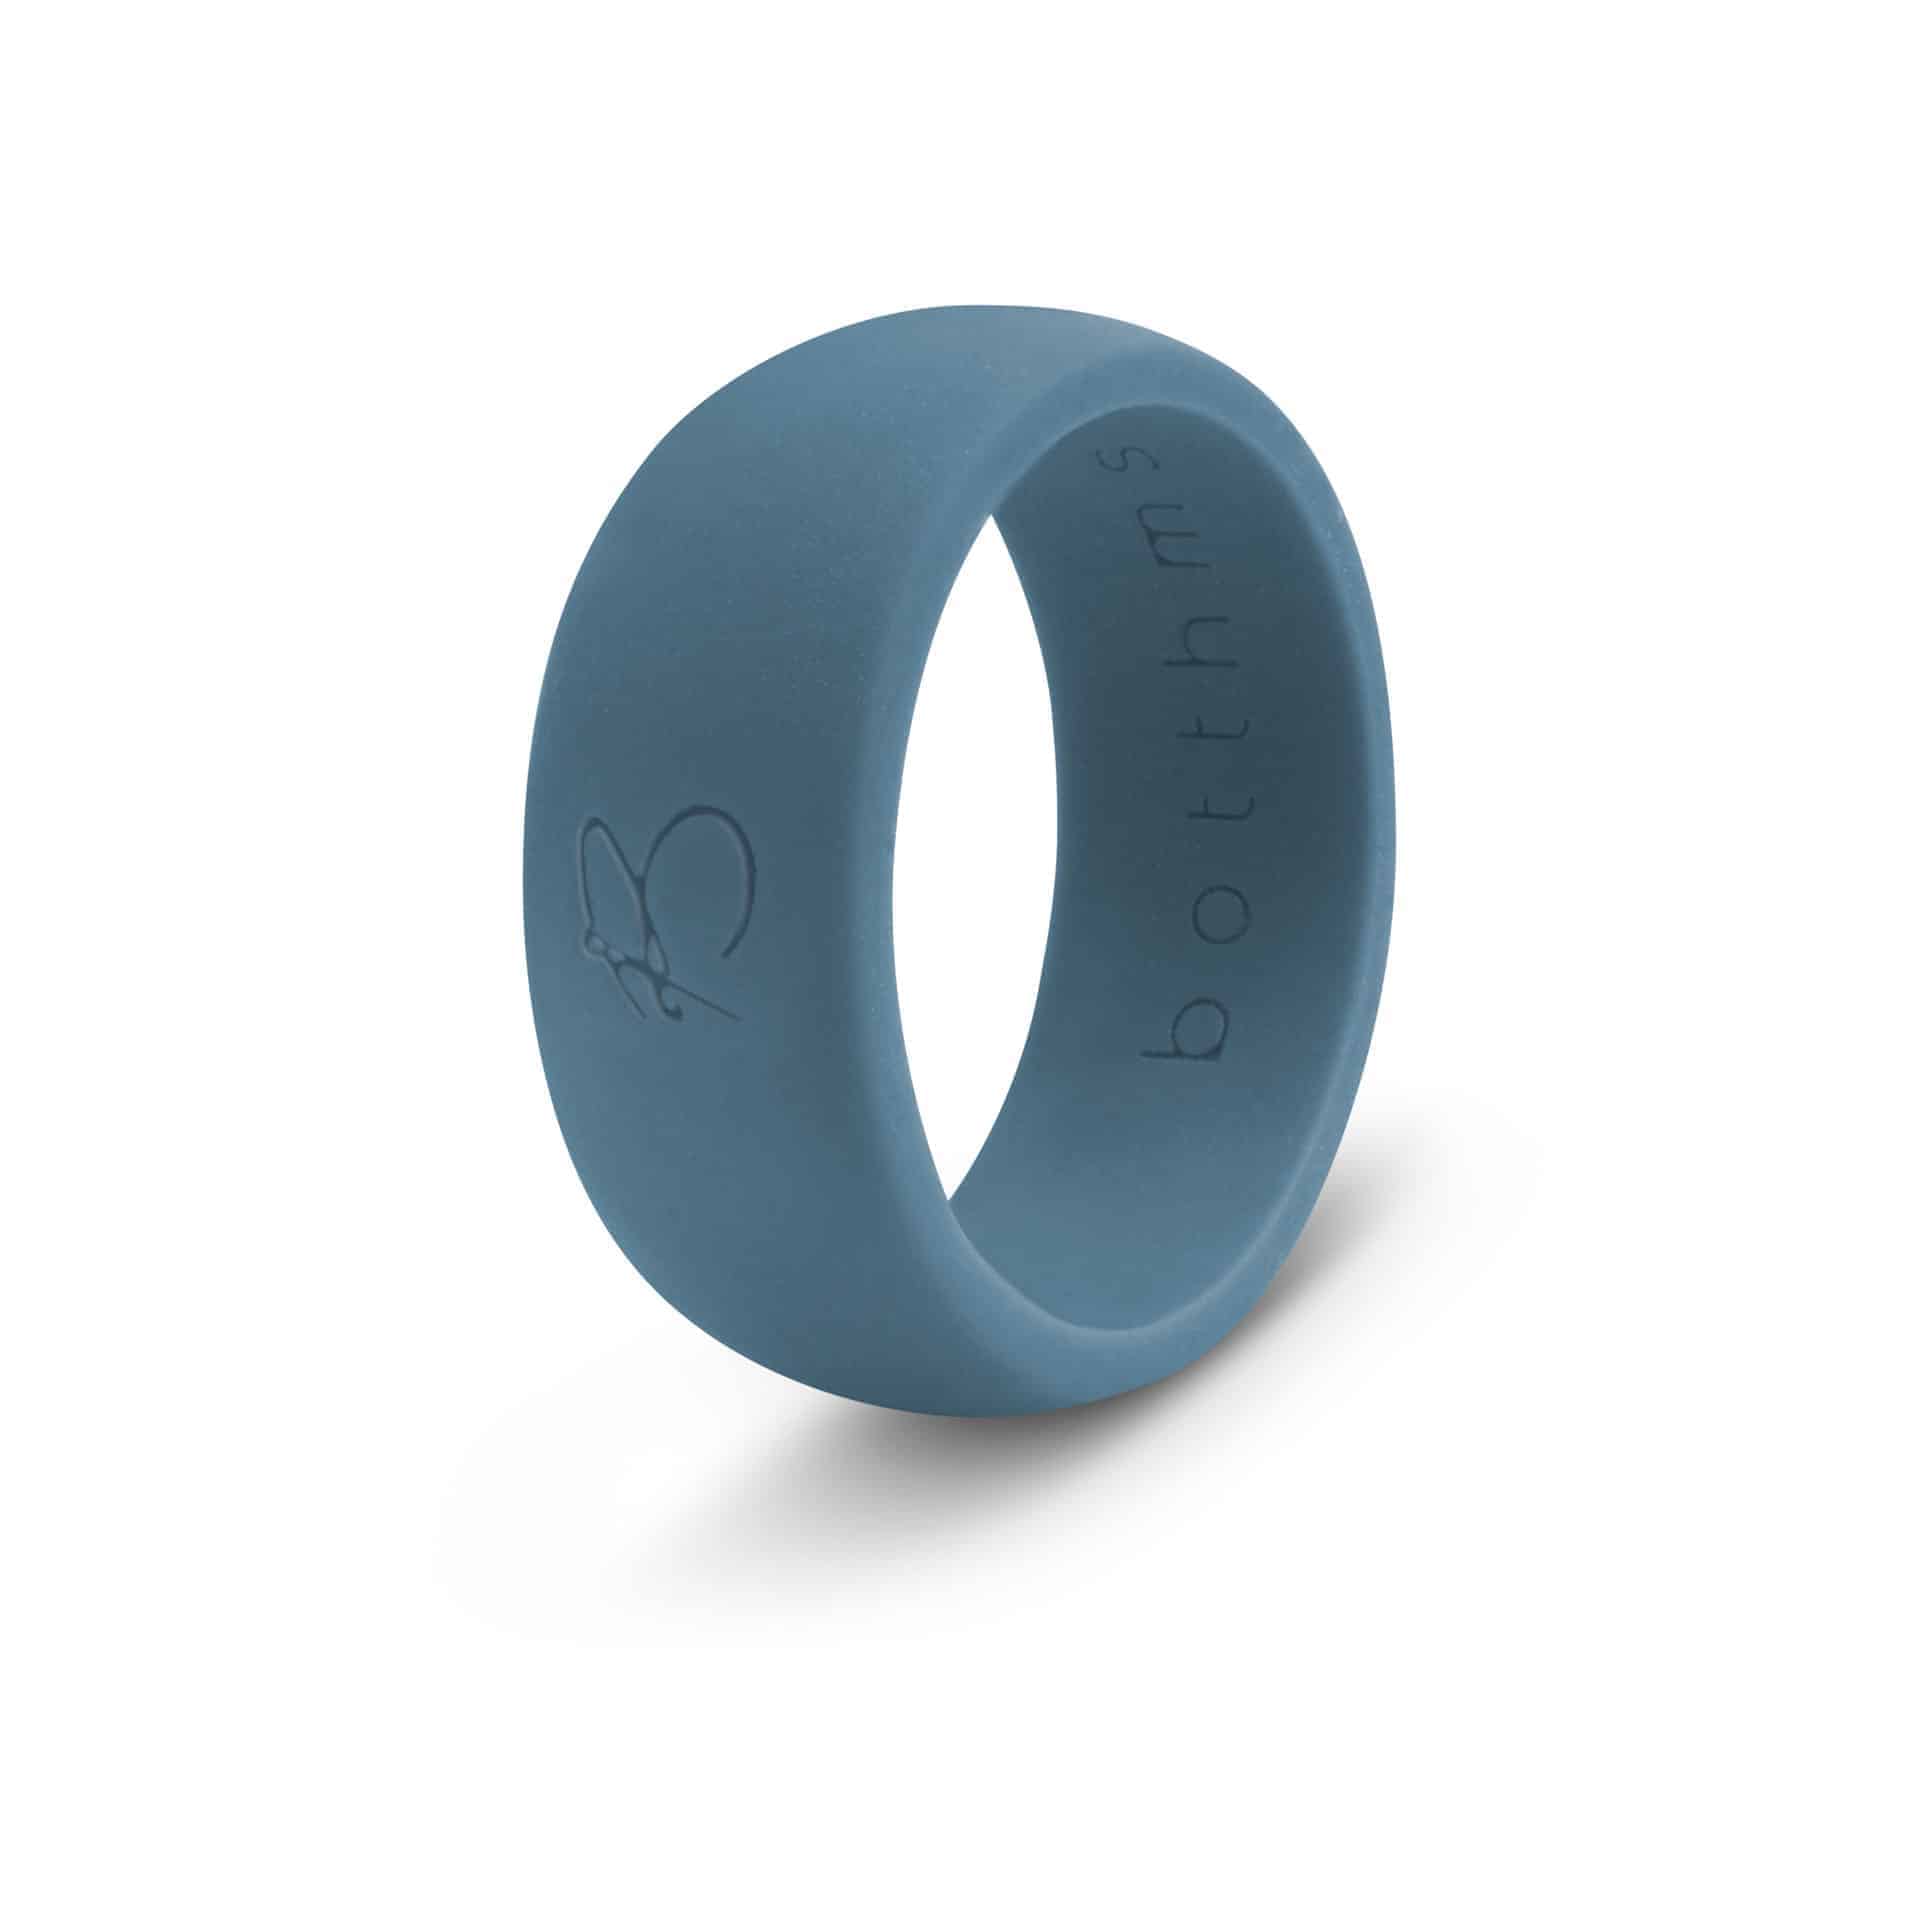 botthms light blue active silicone ring